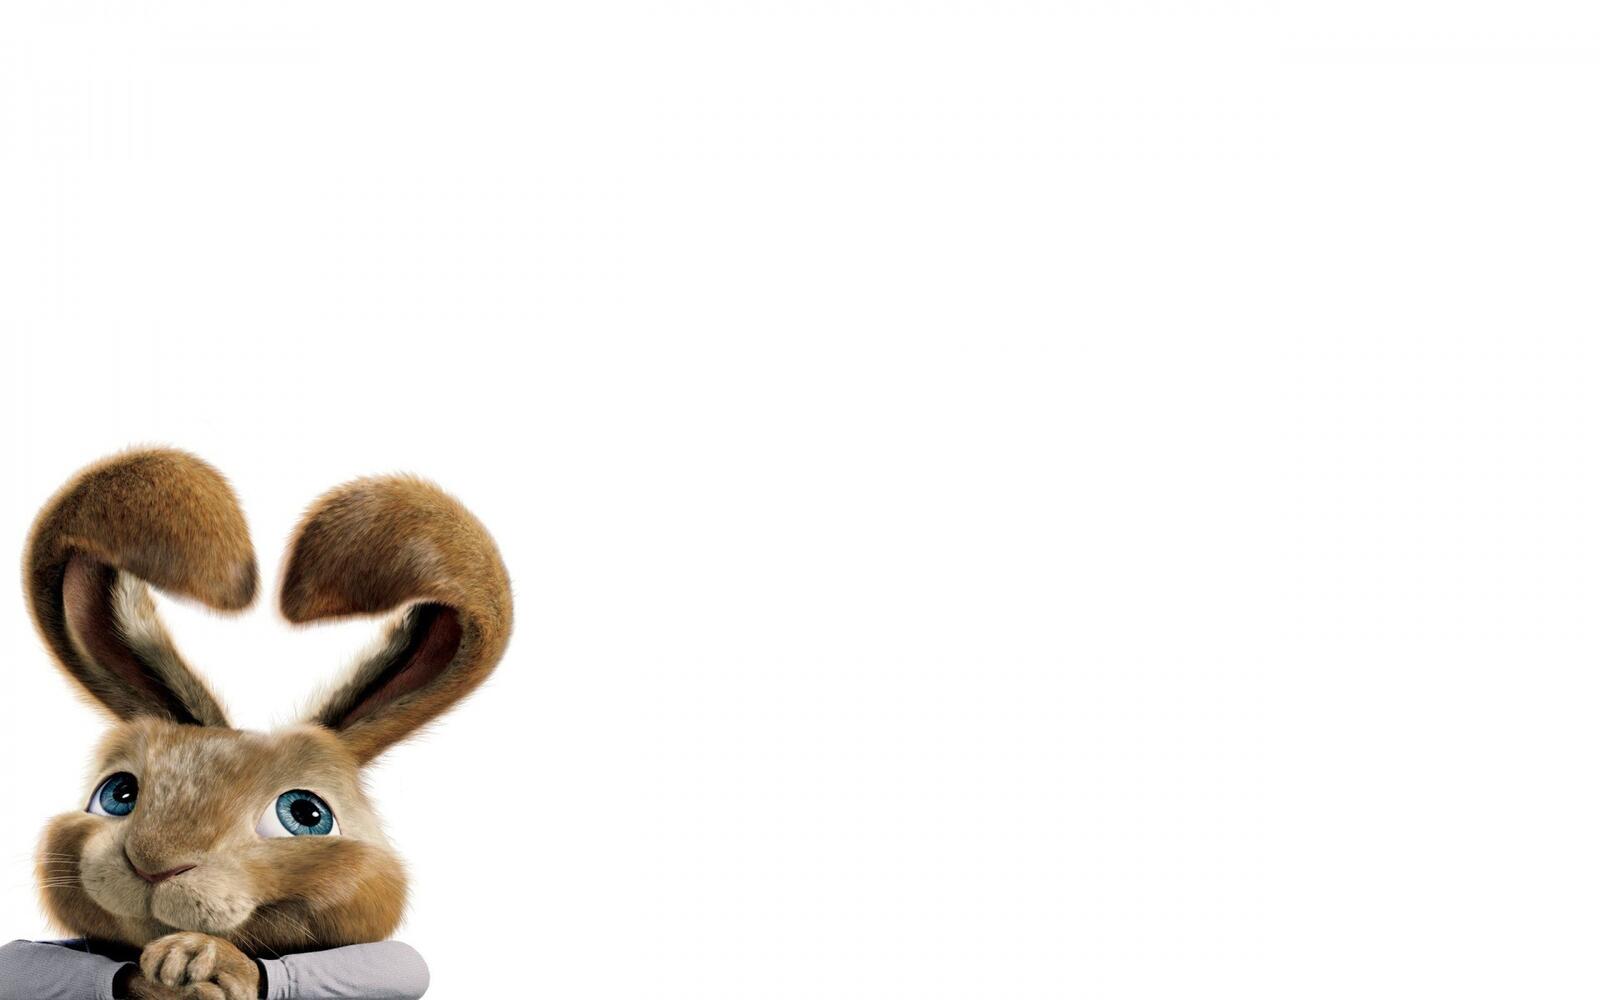 Free photo Toy long-eared bunny on white background